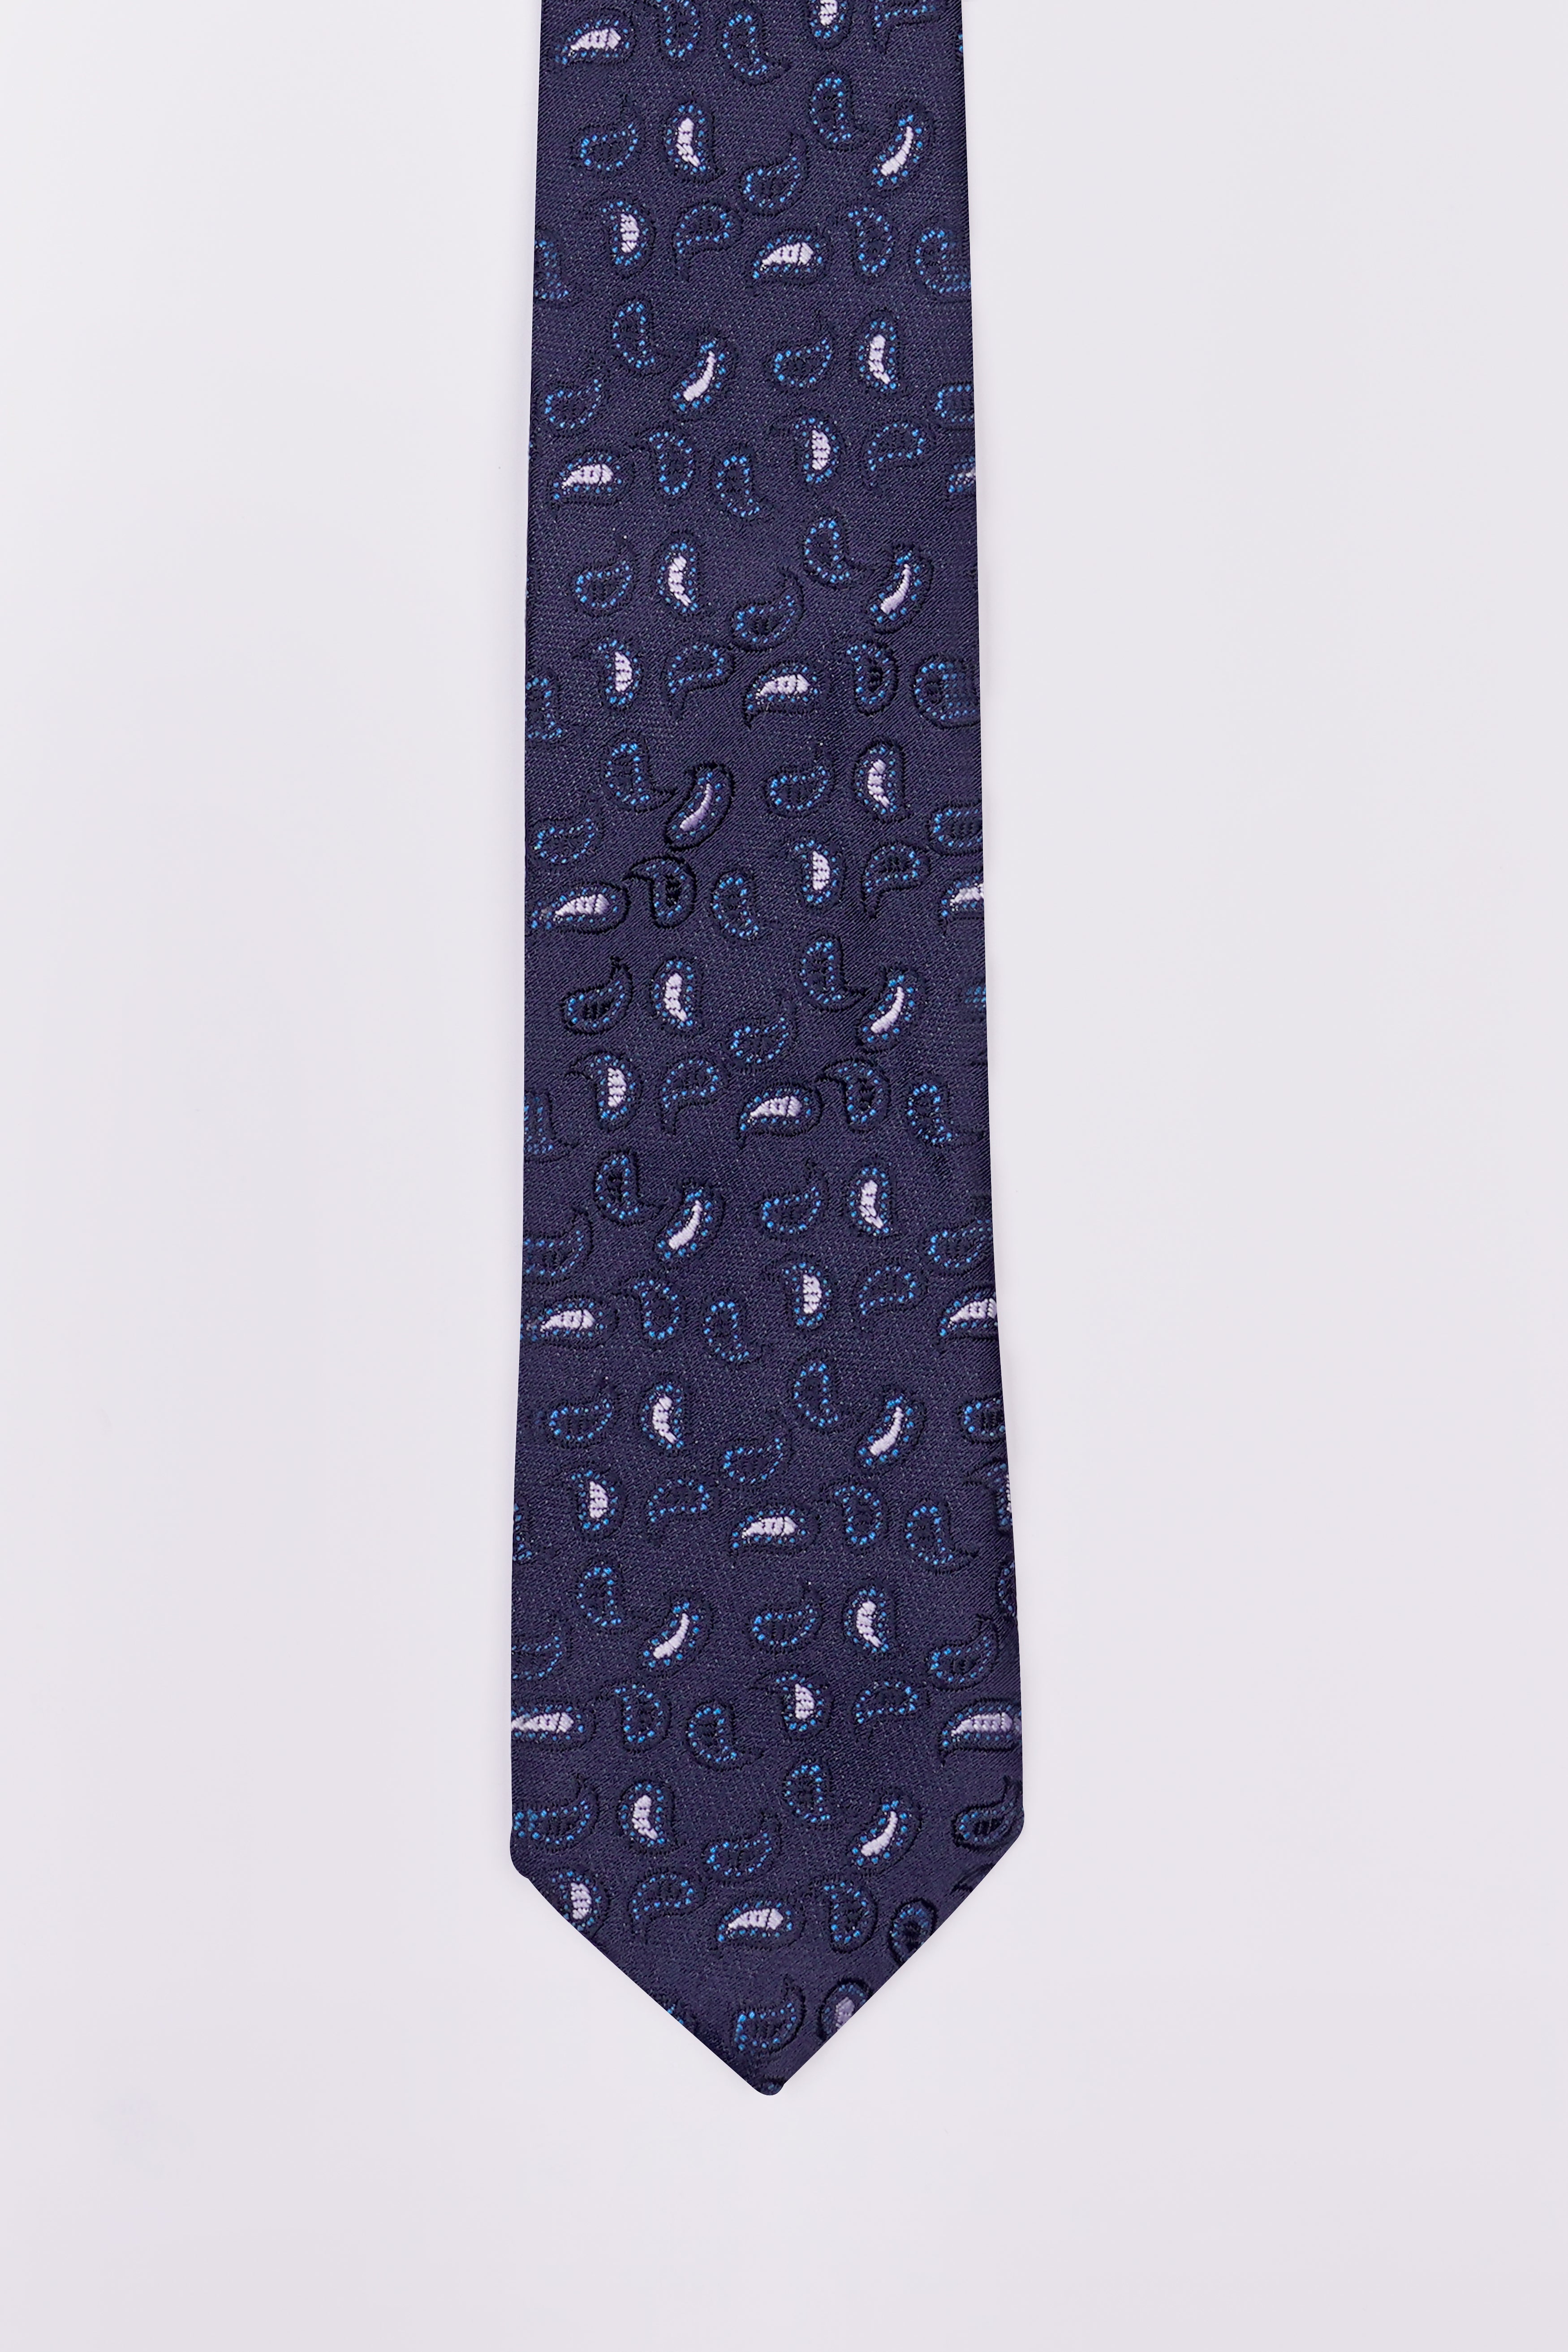 Martinique Navy Blue and White Paisley Jacquard Tie with Pocket Square  TP051